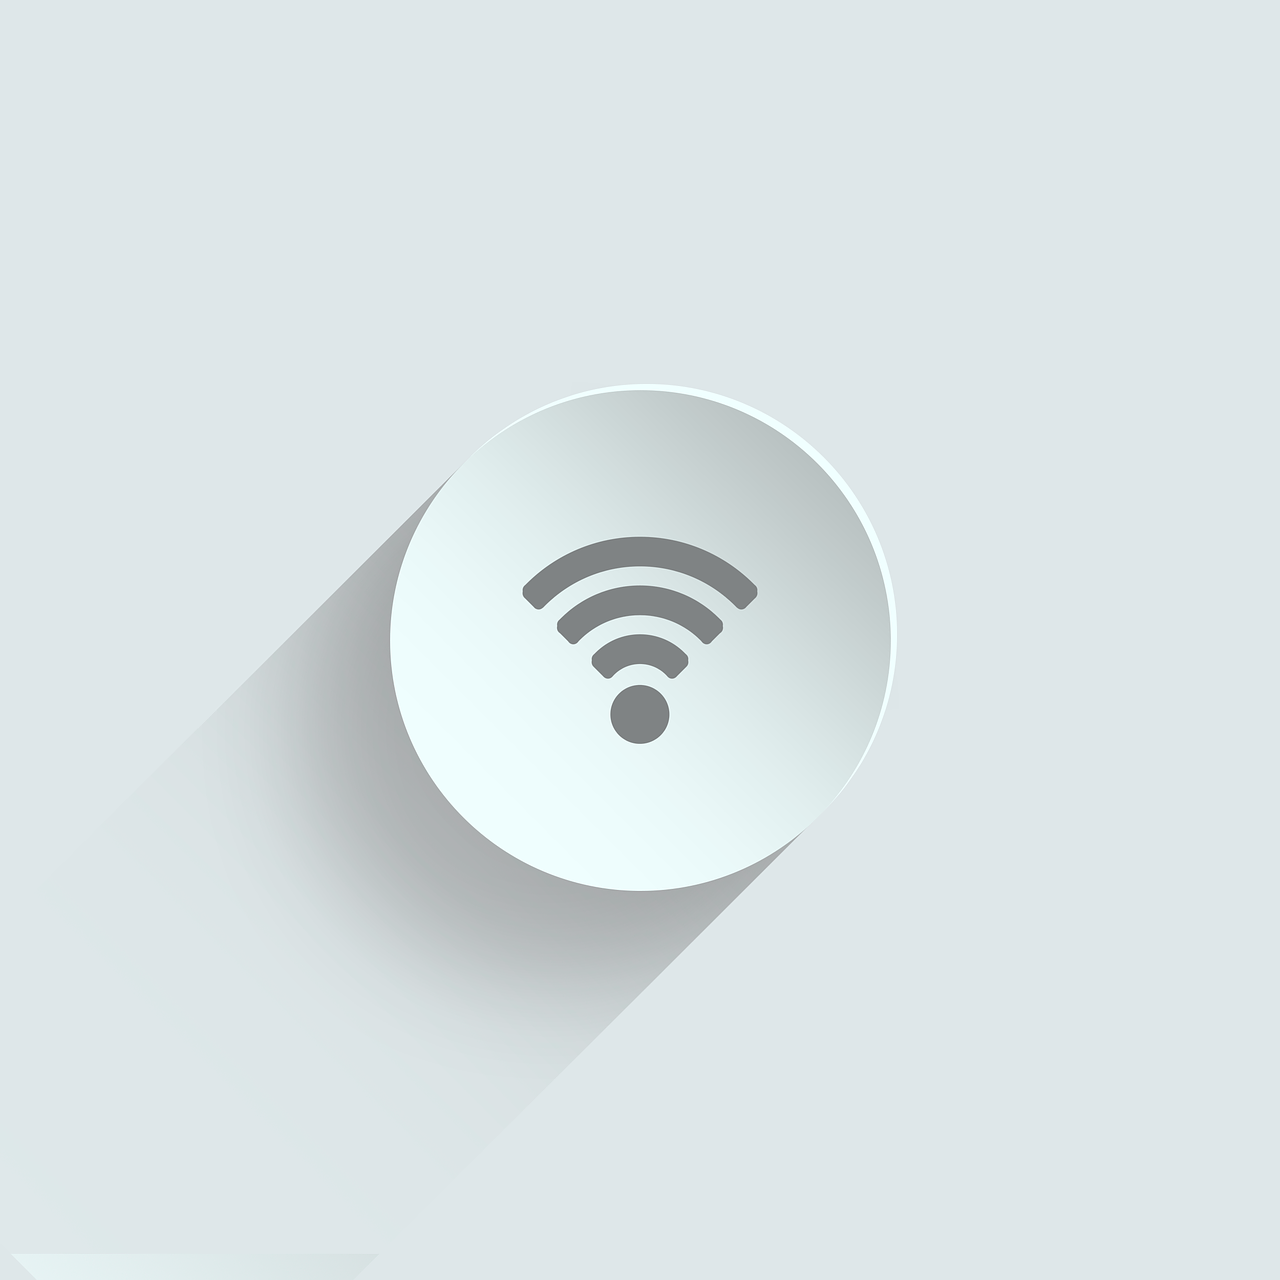 How to turn off wifi calling